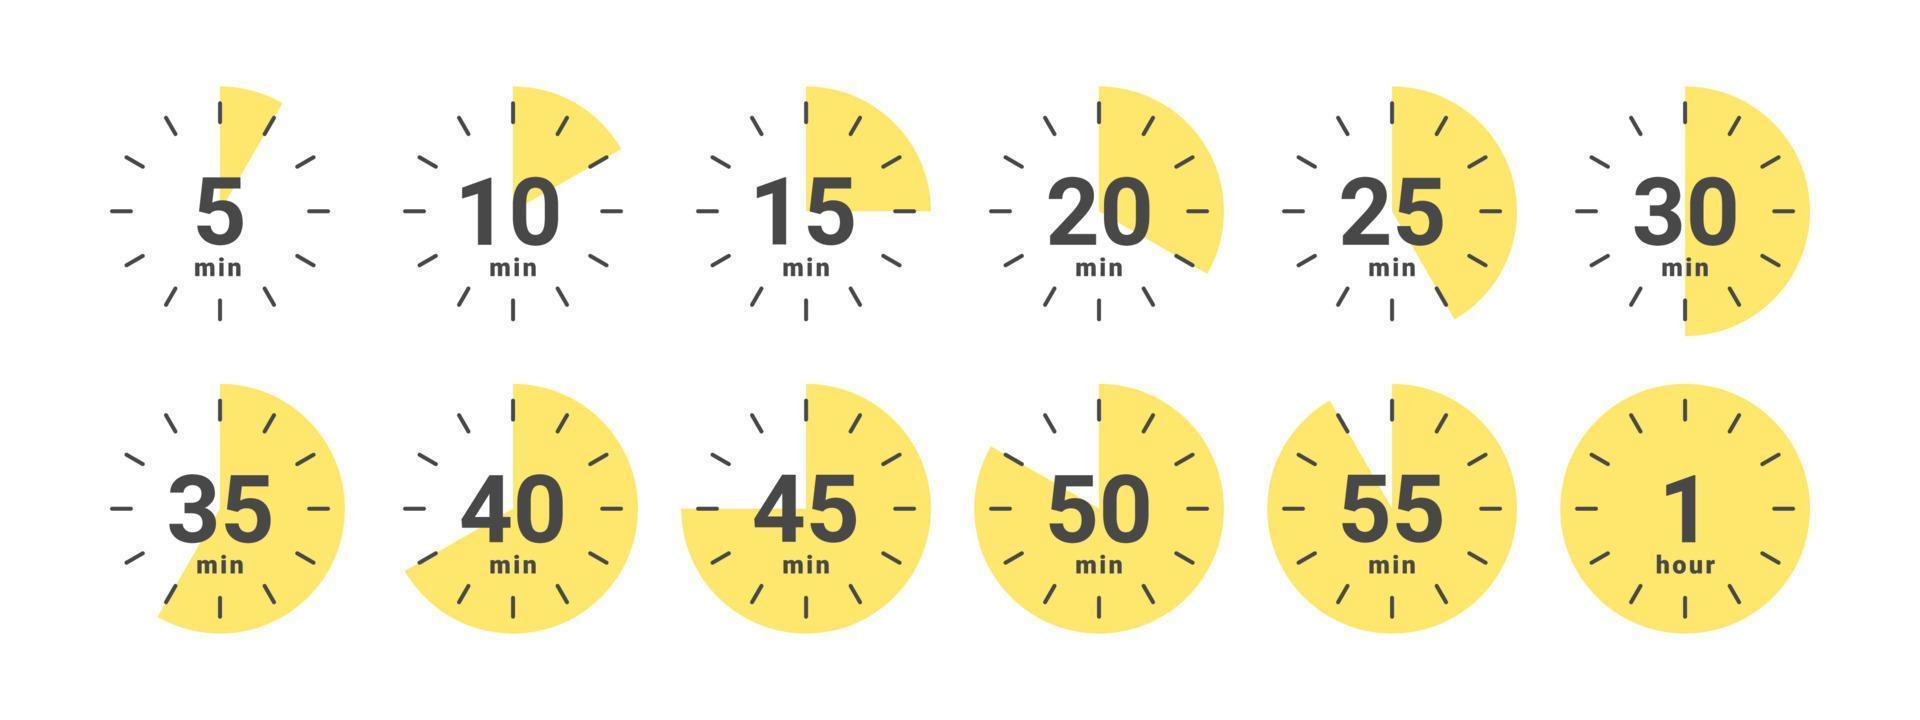 https://static.vecteezy.com/system/resources/previews/016/185/885/non_2x/cooking-time-icons-for-food-stopwatch-icons-icons-of-time-in-minutes-illustration-vector.jpg